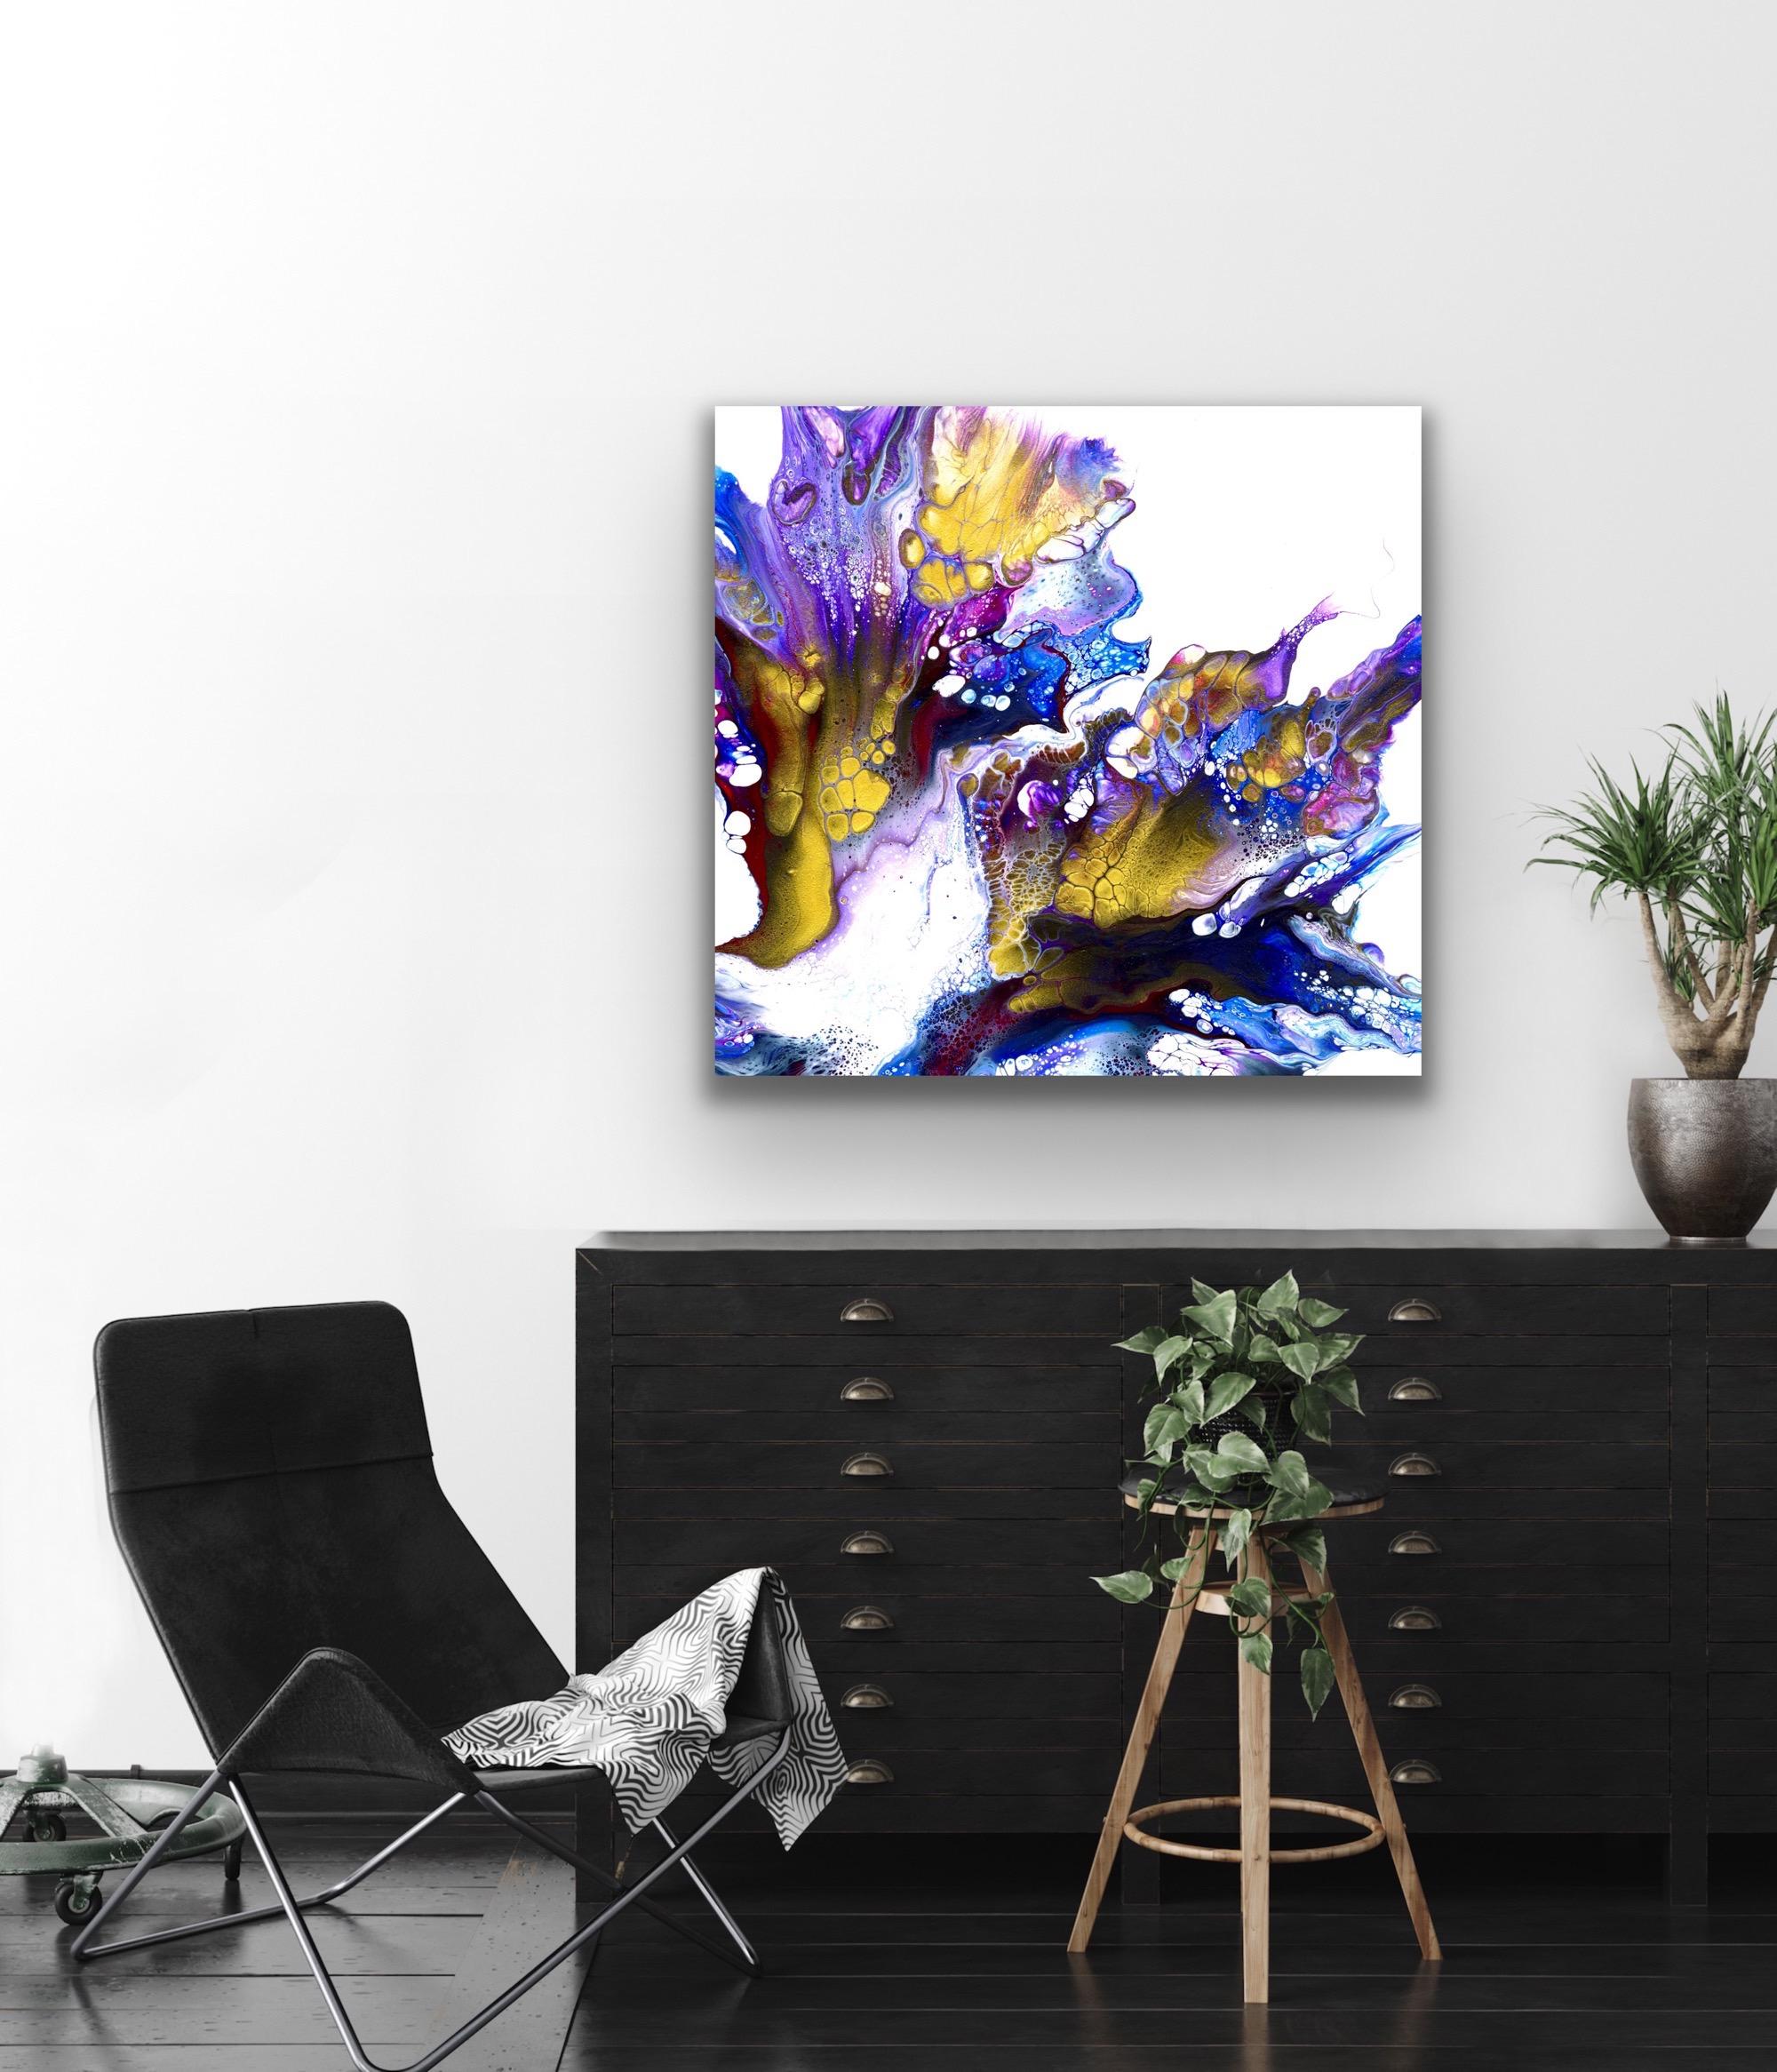 Contemporary Modern Abstract, Giclee Print on Metal, Limited Edition, by Cessy  1